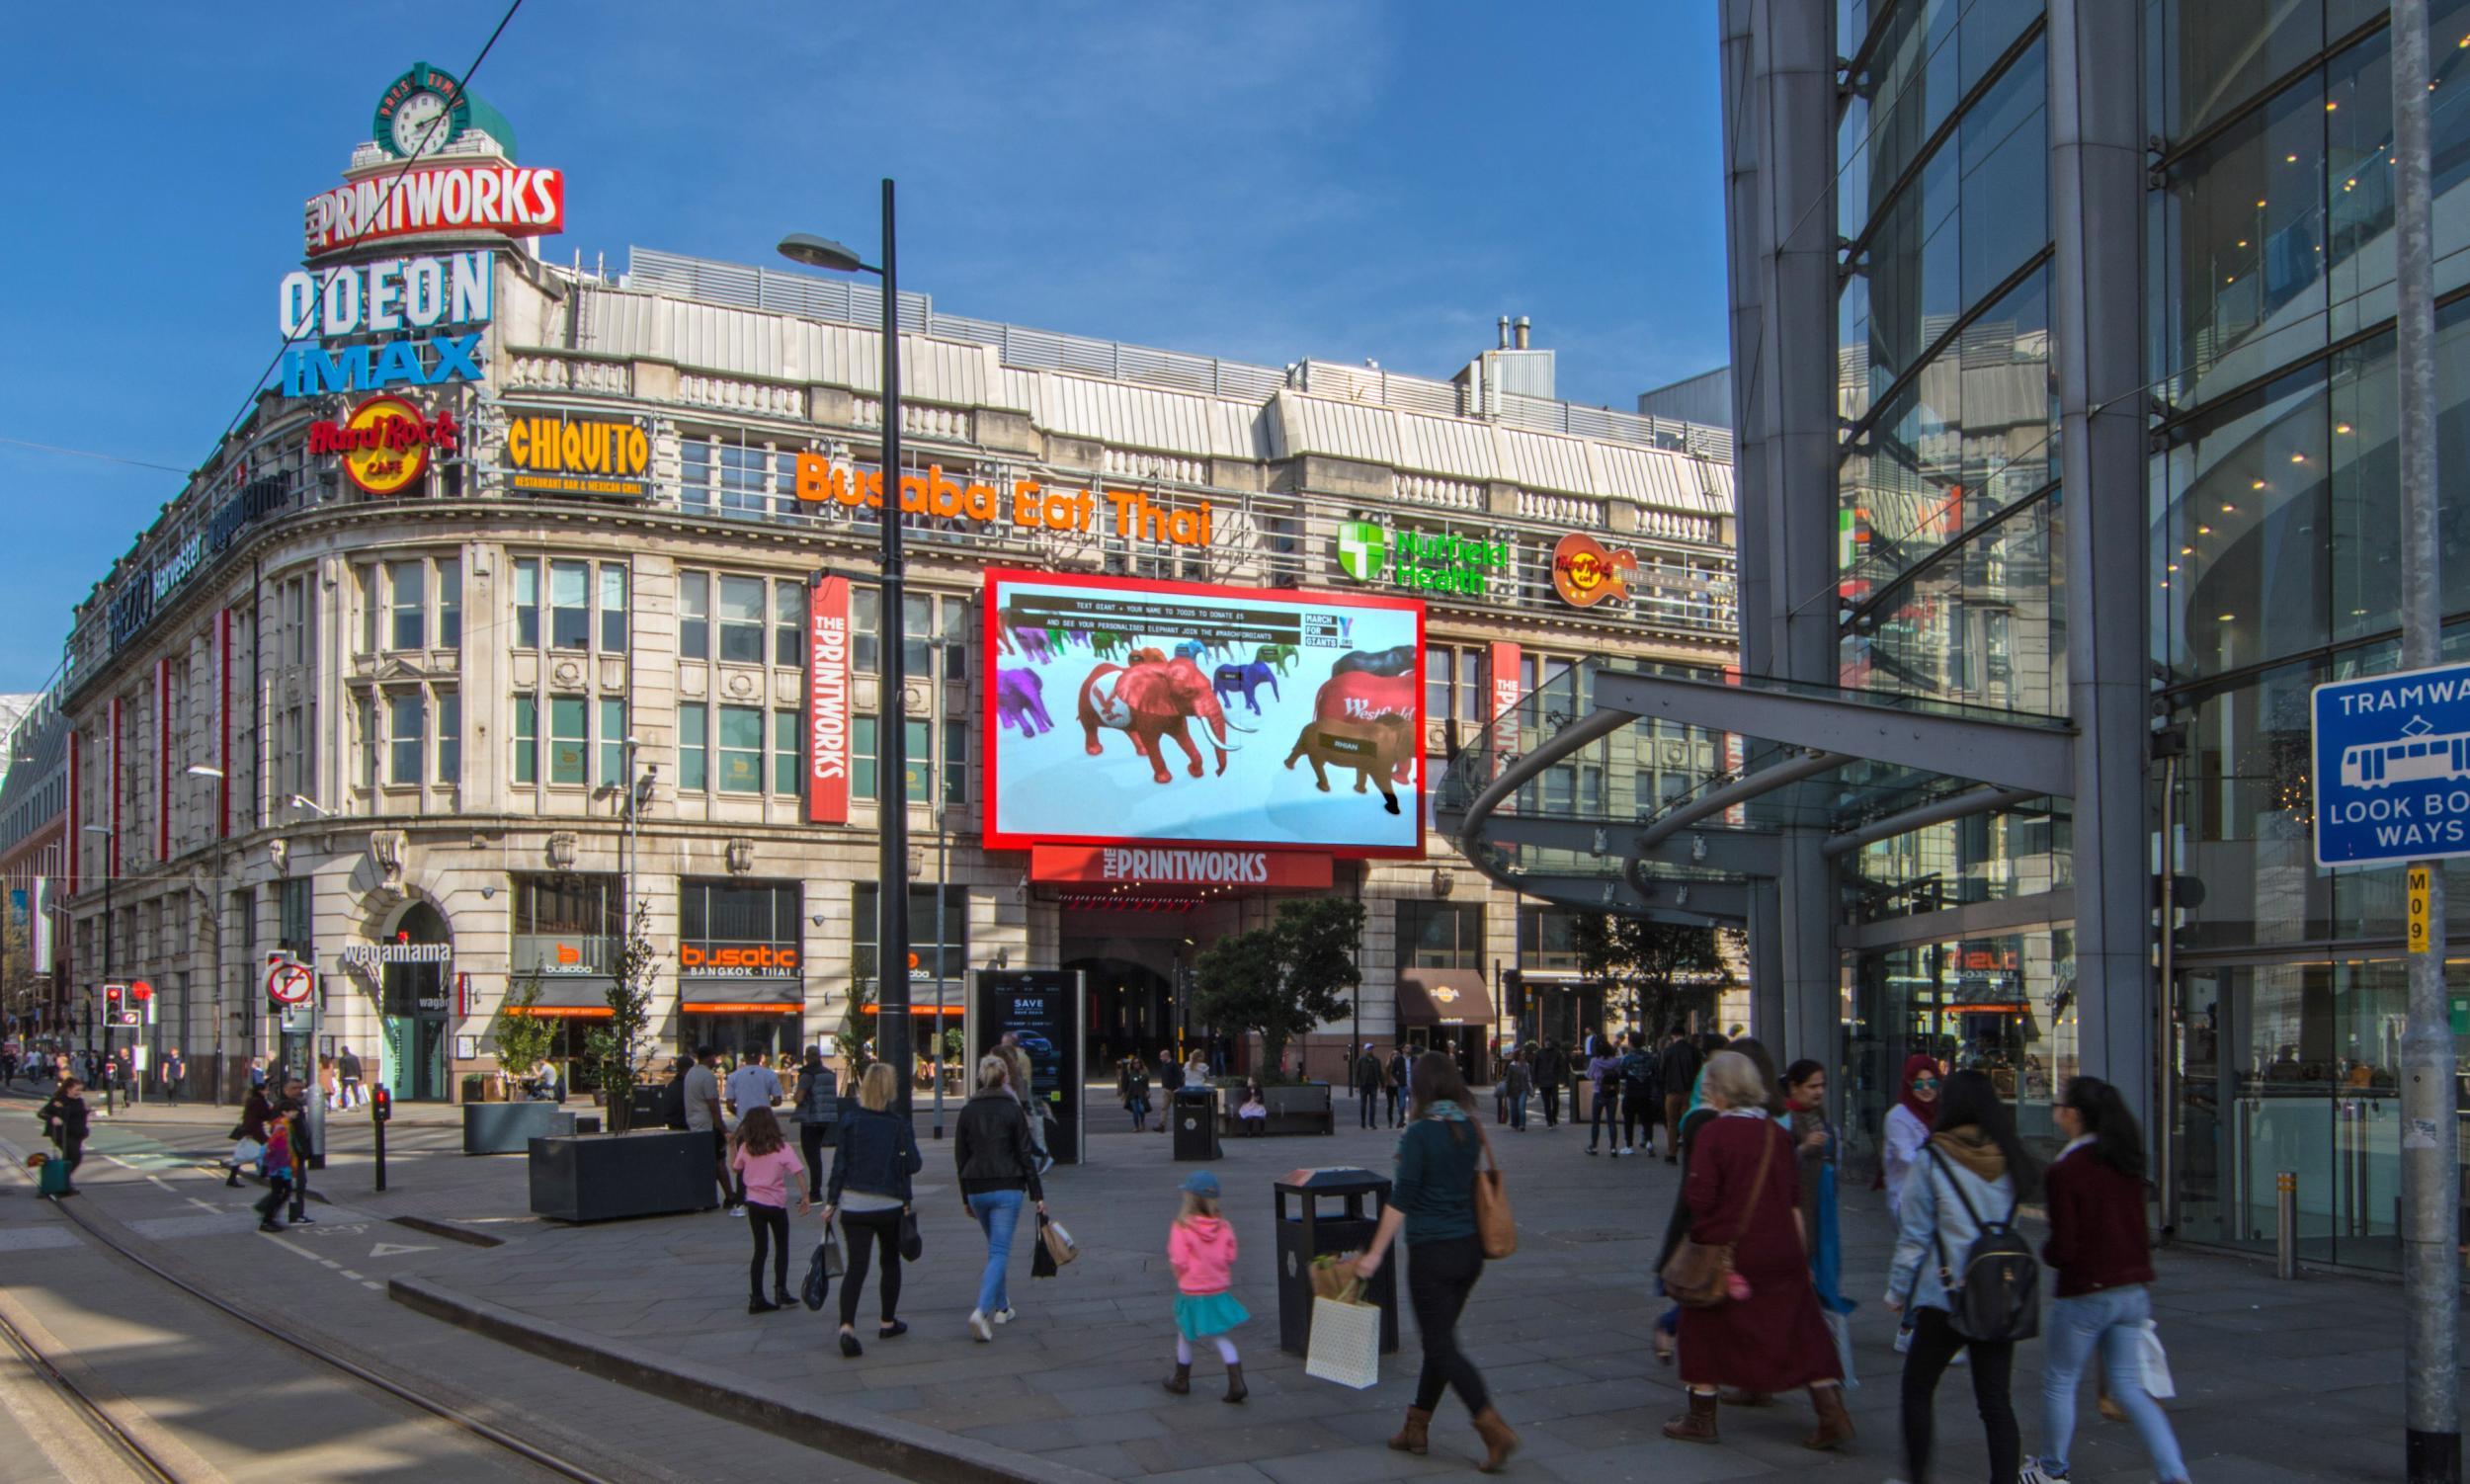 The herd marches on Manchester's Printworks screen